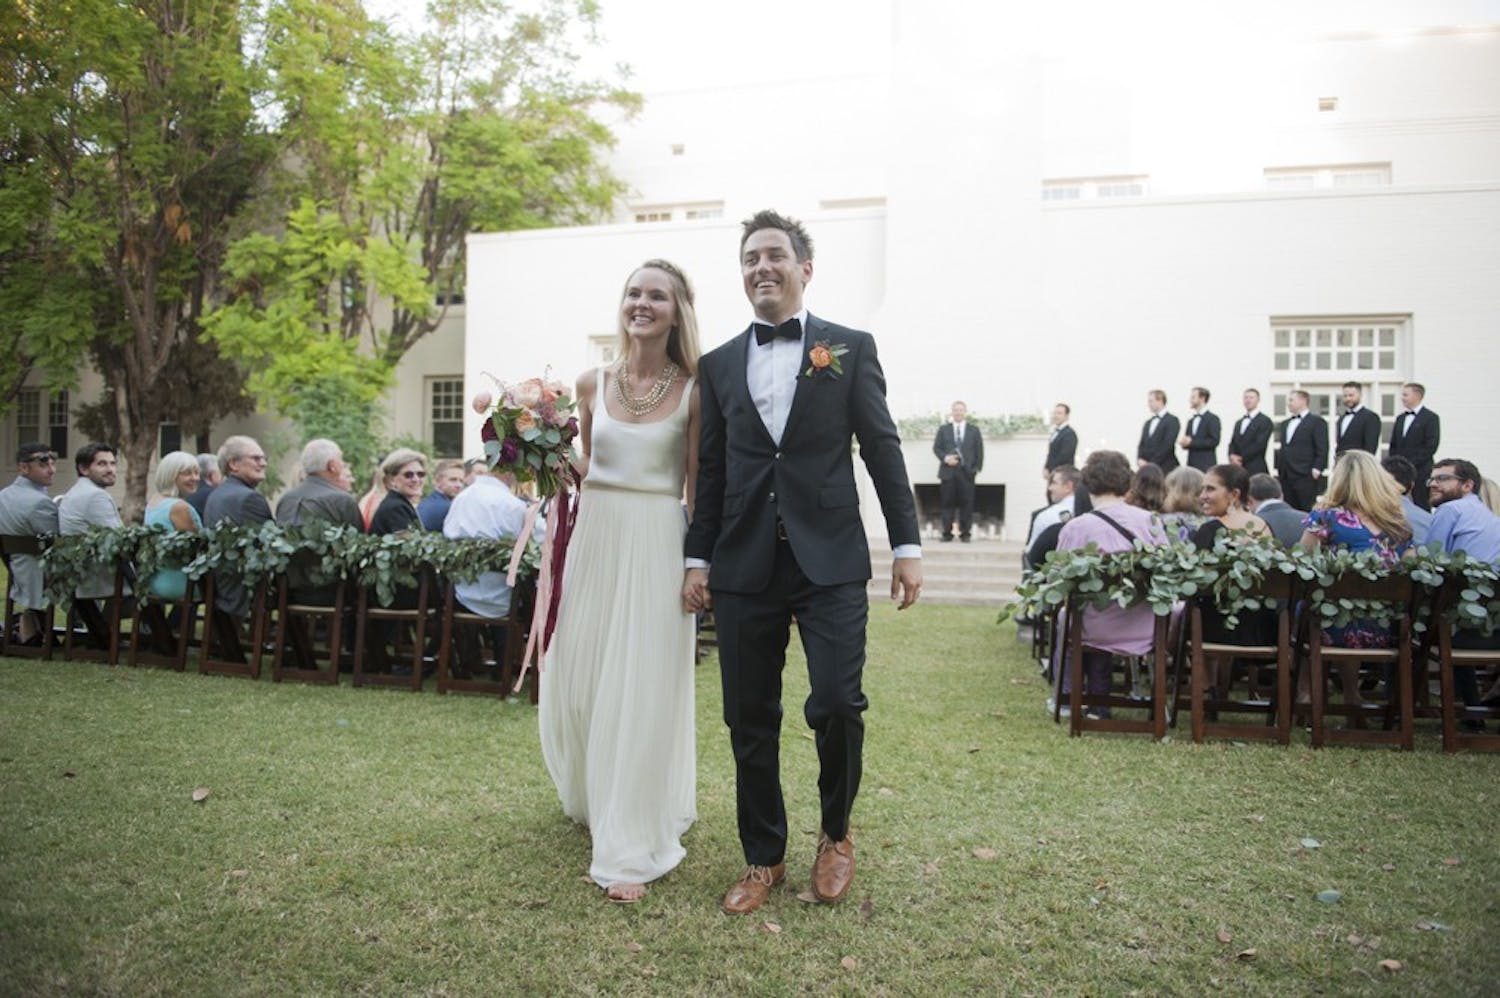 ASU alumni Heather Hague (left) and Tyler Anderson walk down the aisle after their marriage ceremony on Saturday, Oct. 24, 2015, at the Secret Garden on the Tempe campus.